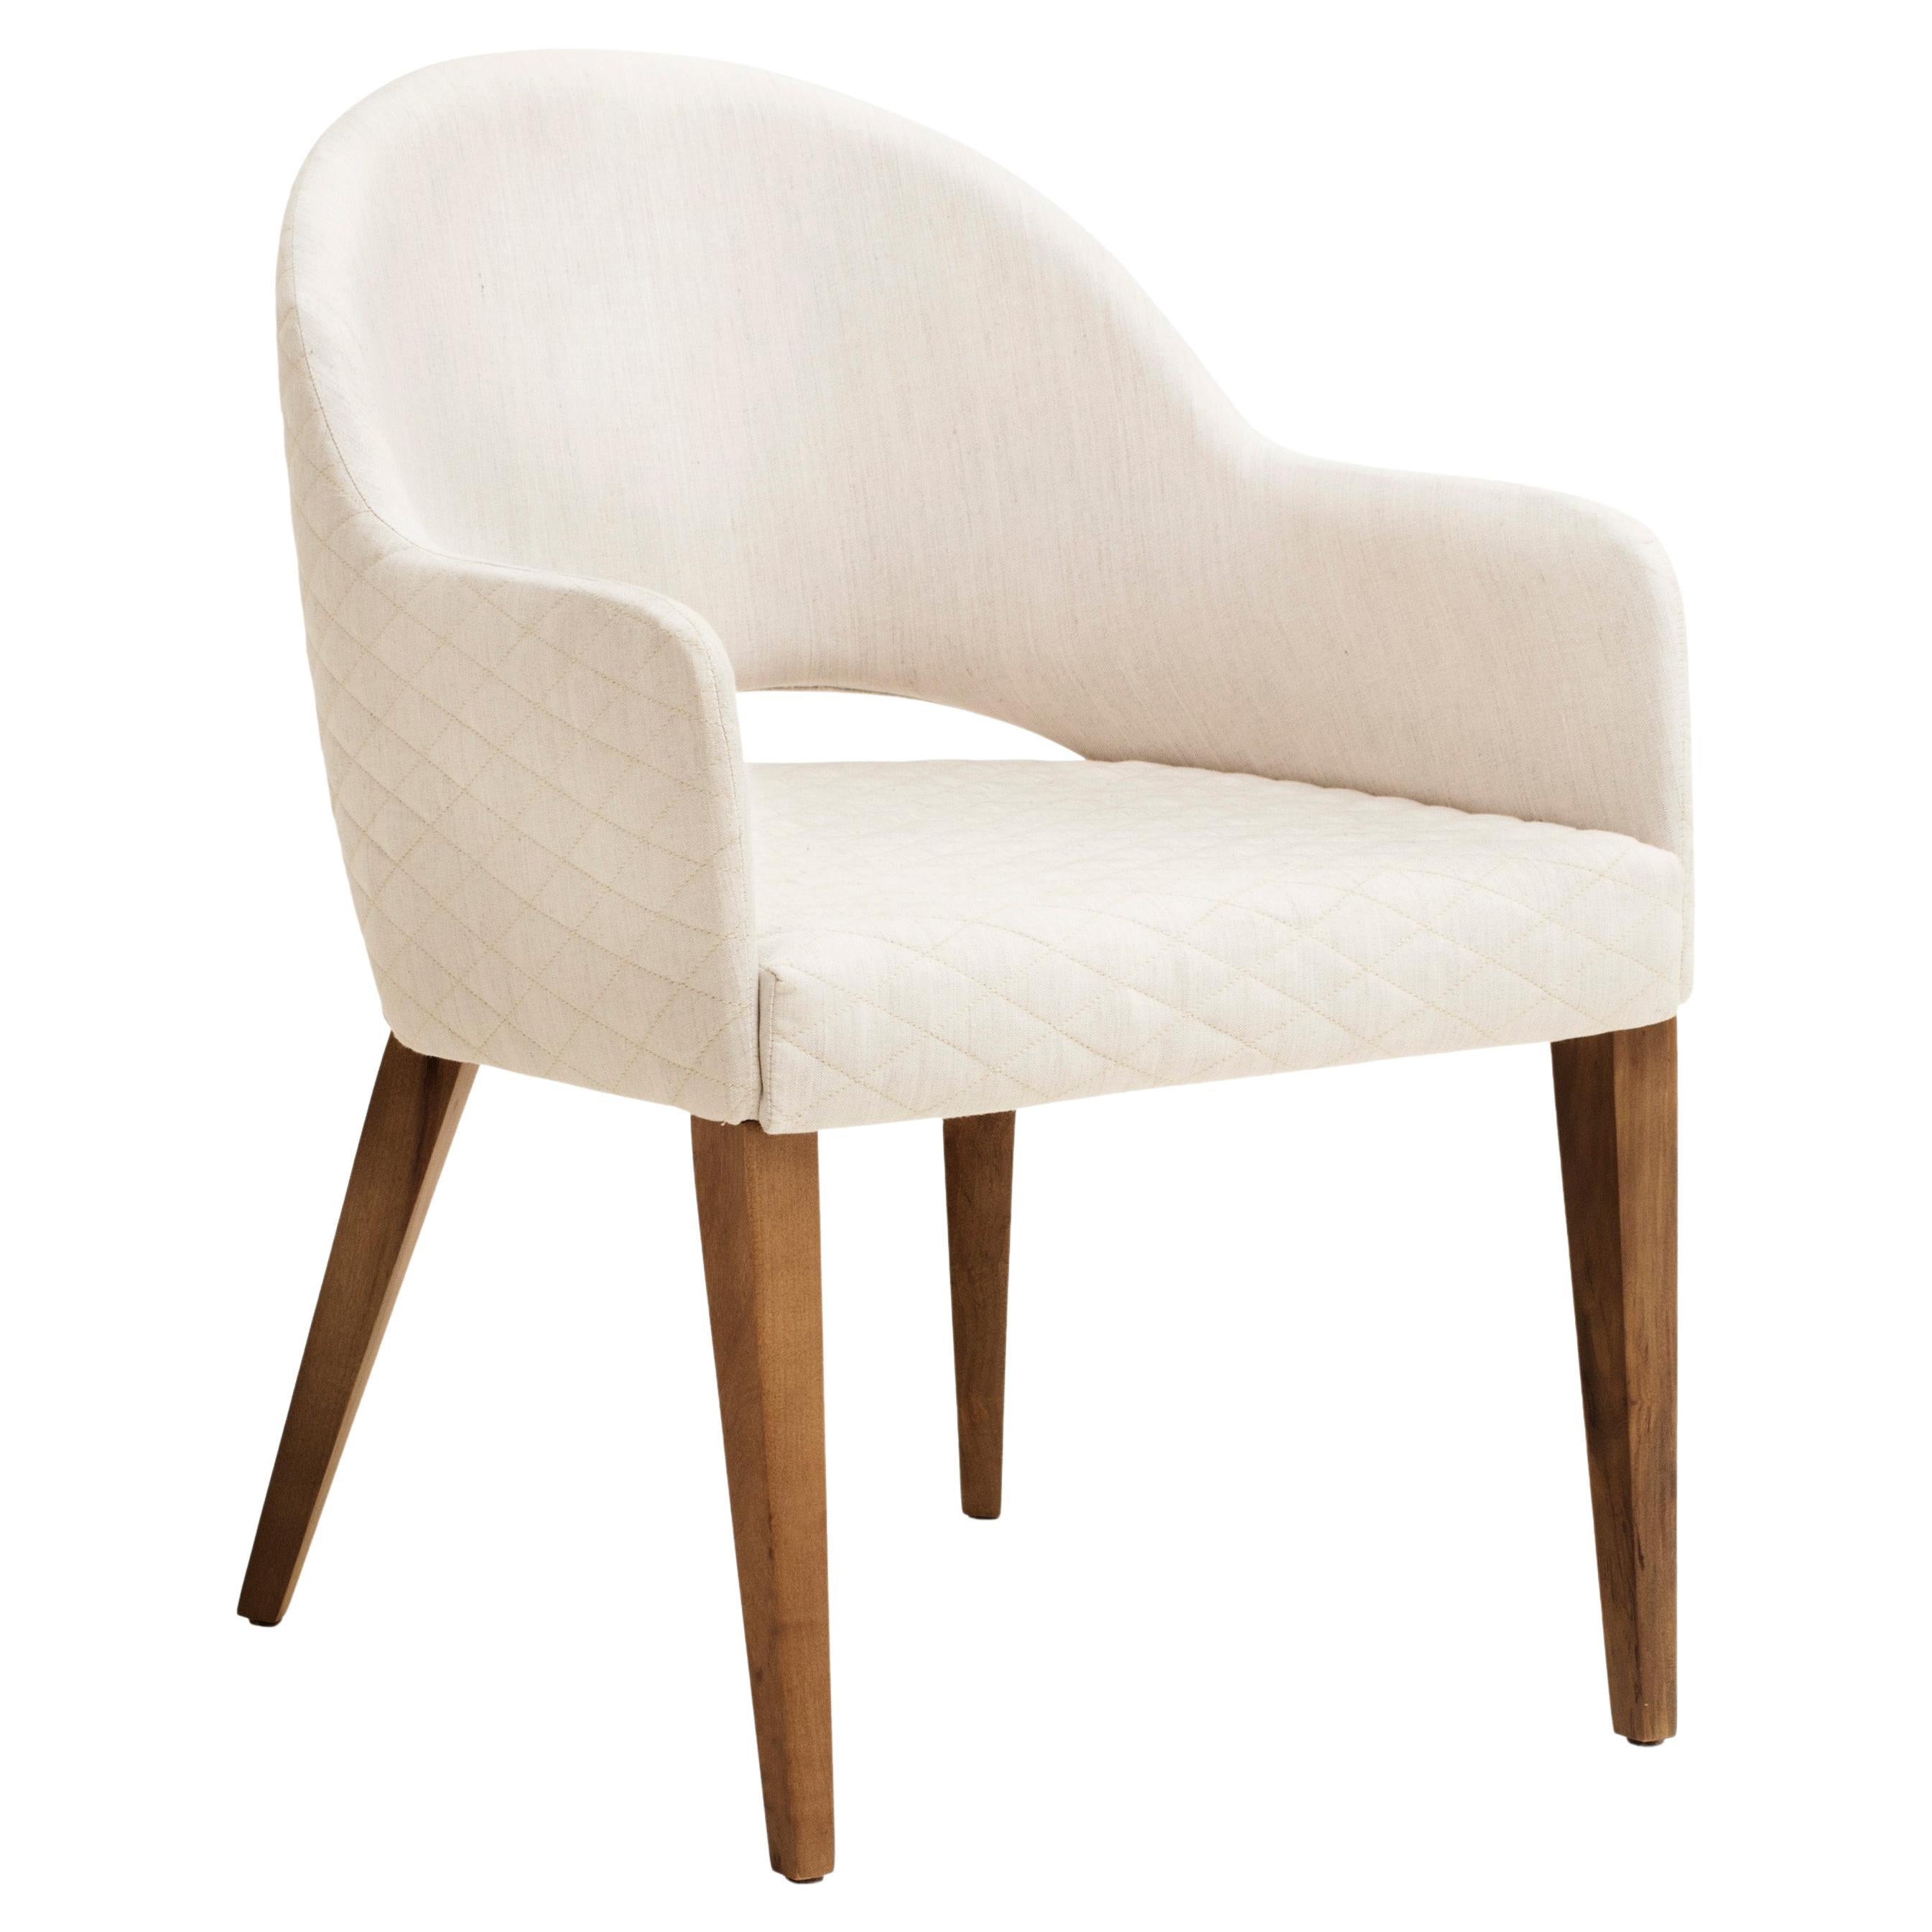 Upholstered Fabric, Wood Legs, Dining Chair Eco